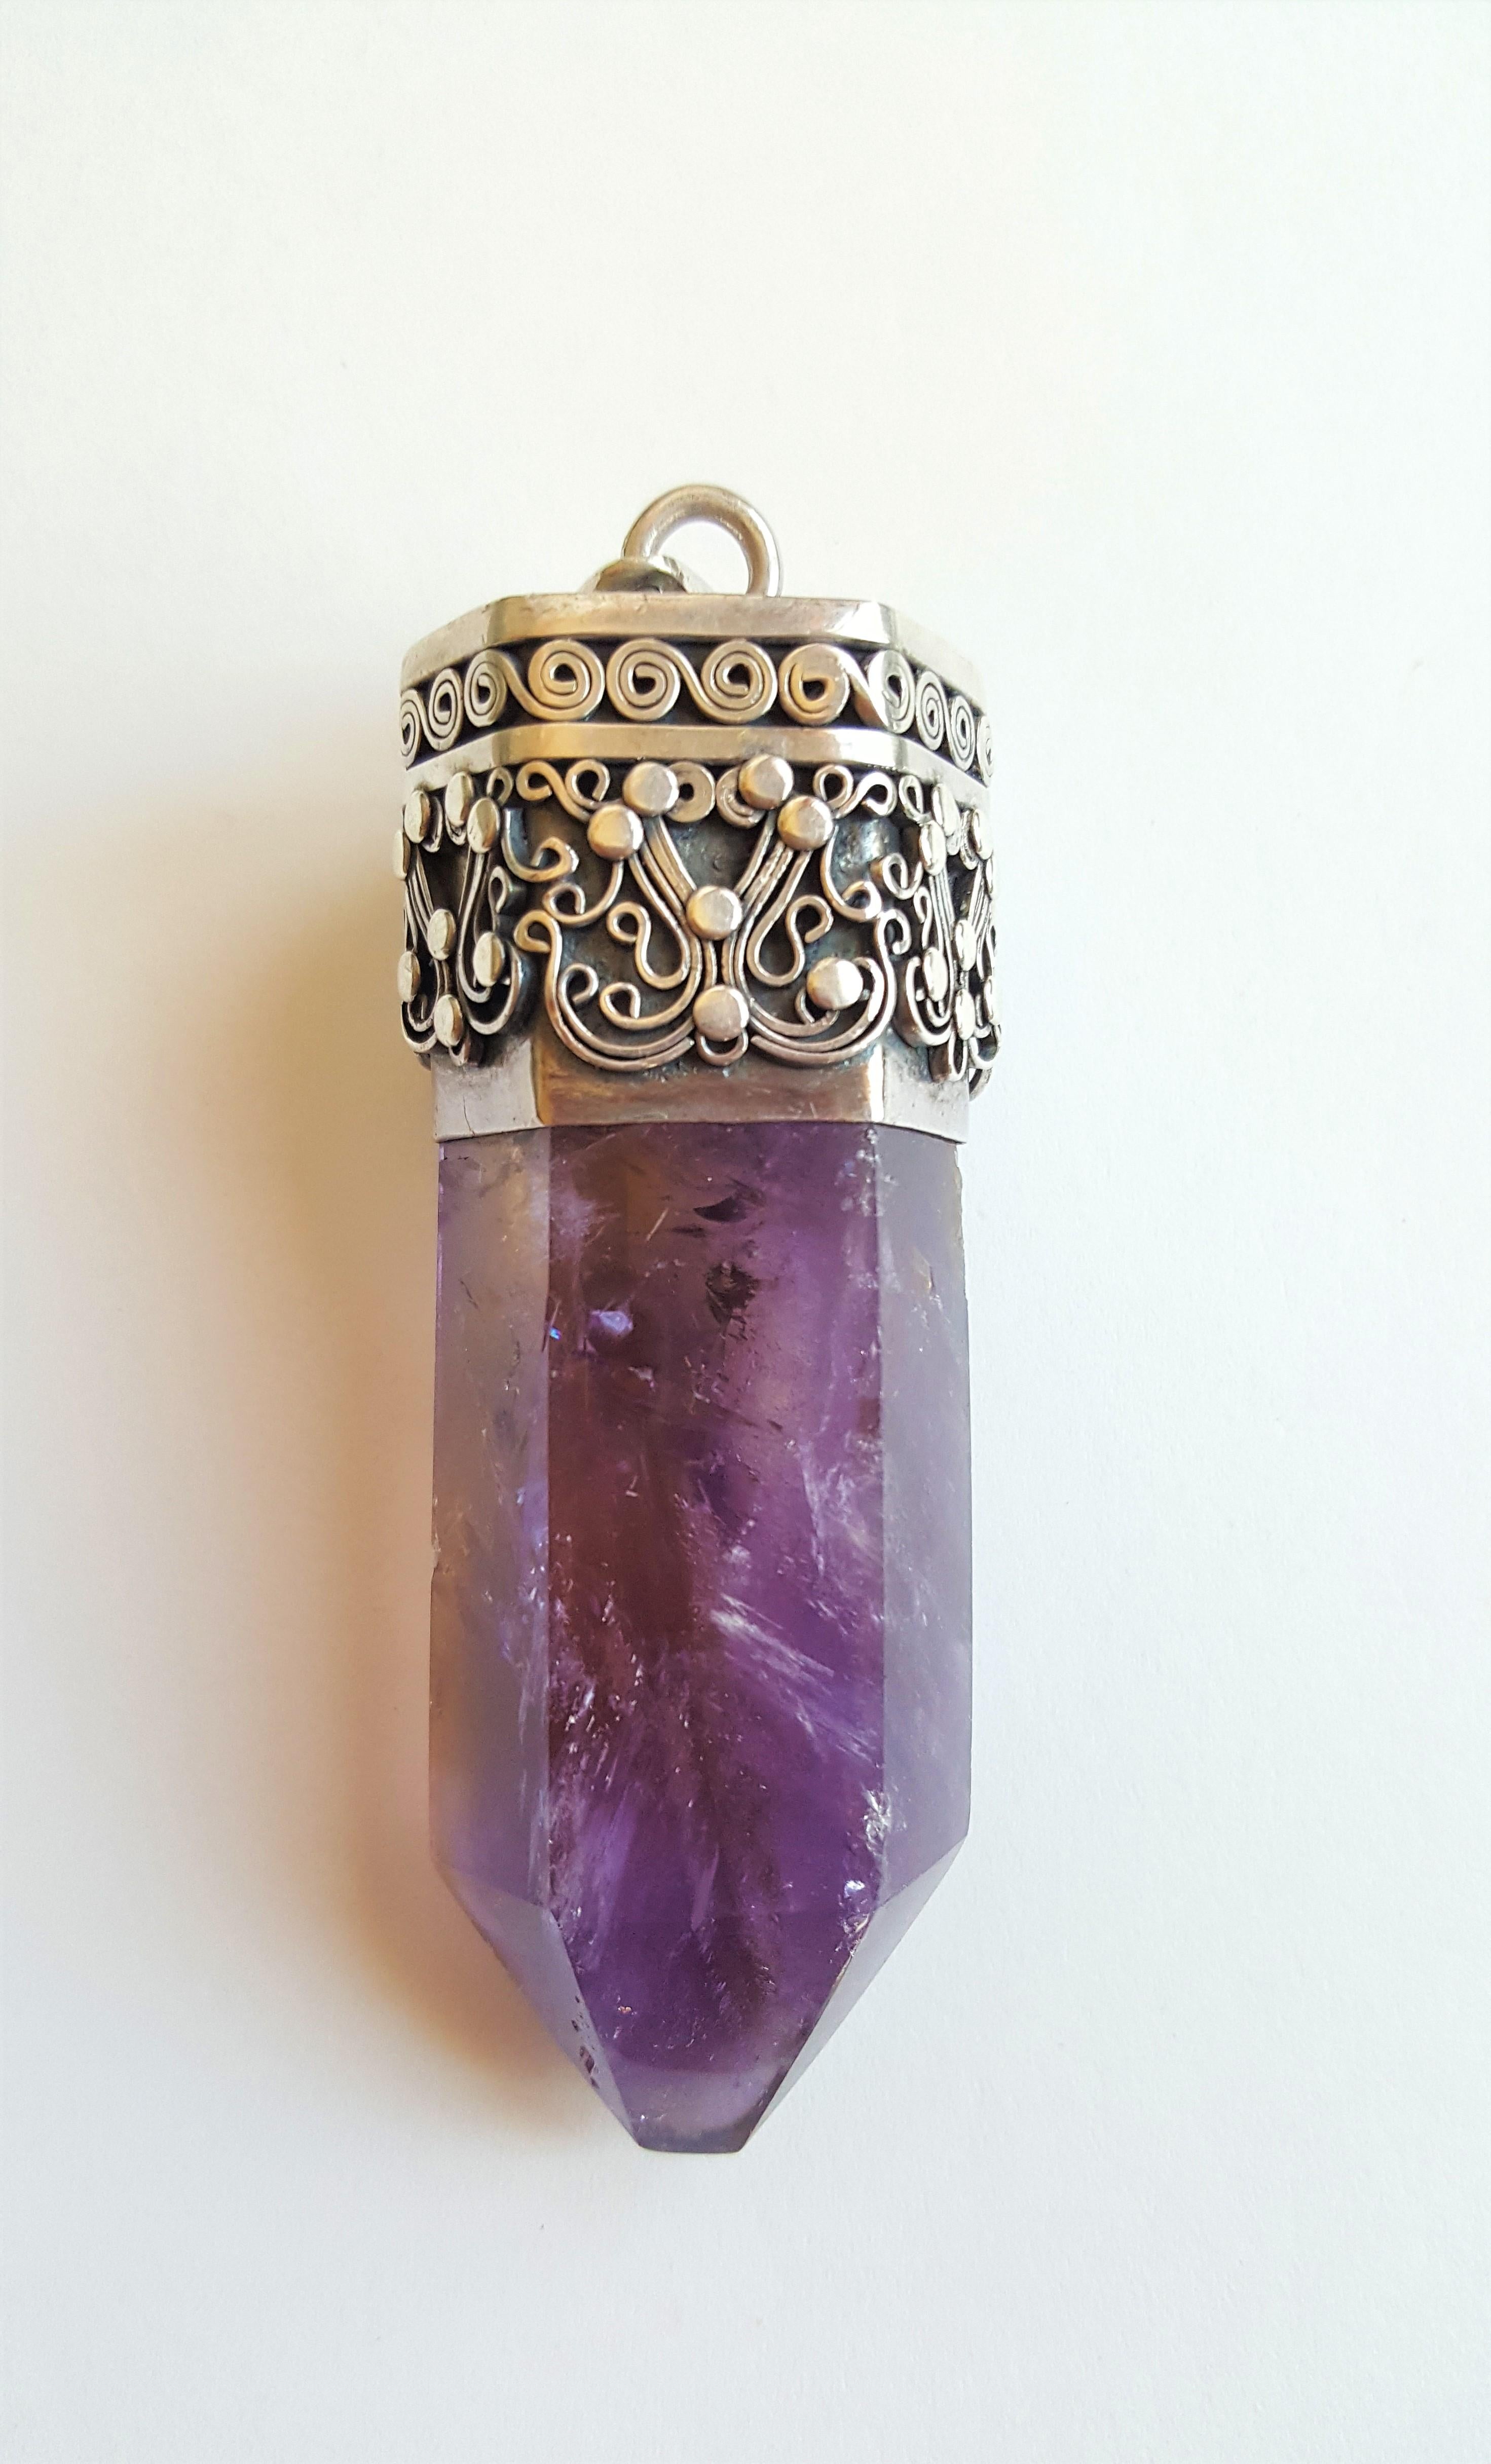 Silver Amethyst Pendant, Rich Purple Intricate Hand Fabricated Design, XL Size In Good Condition For Sale In Rancho Santa Fe, CA